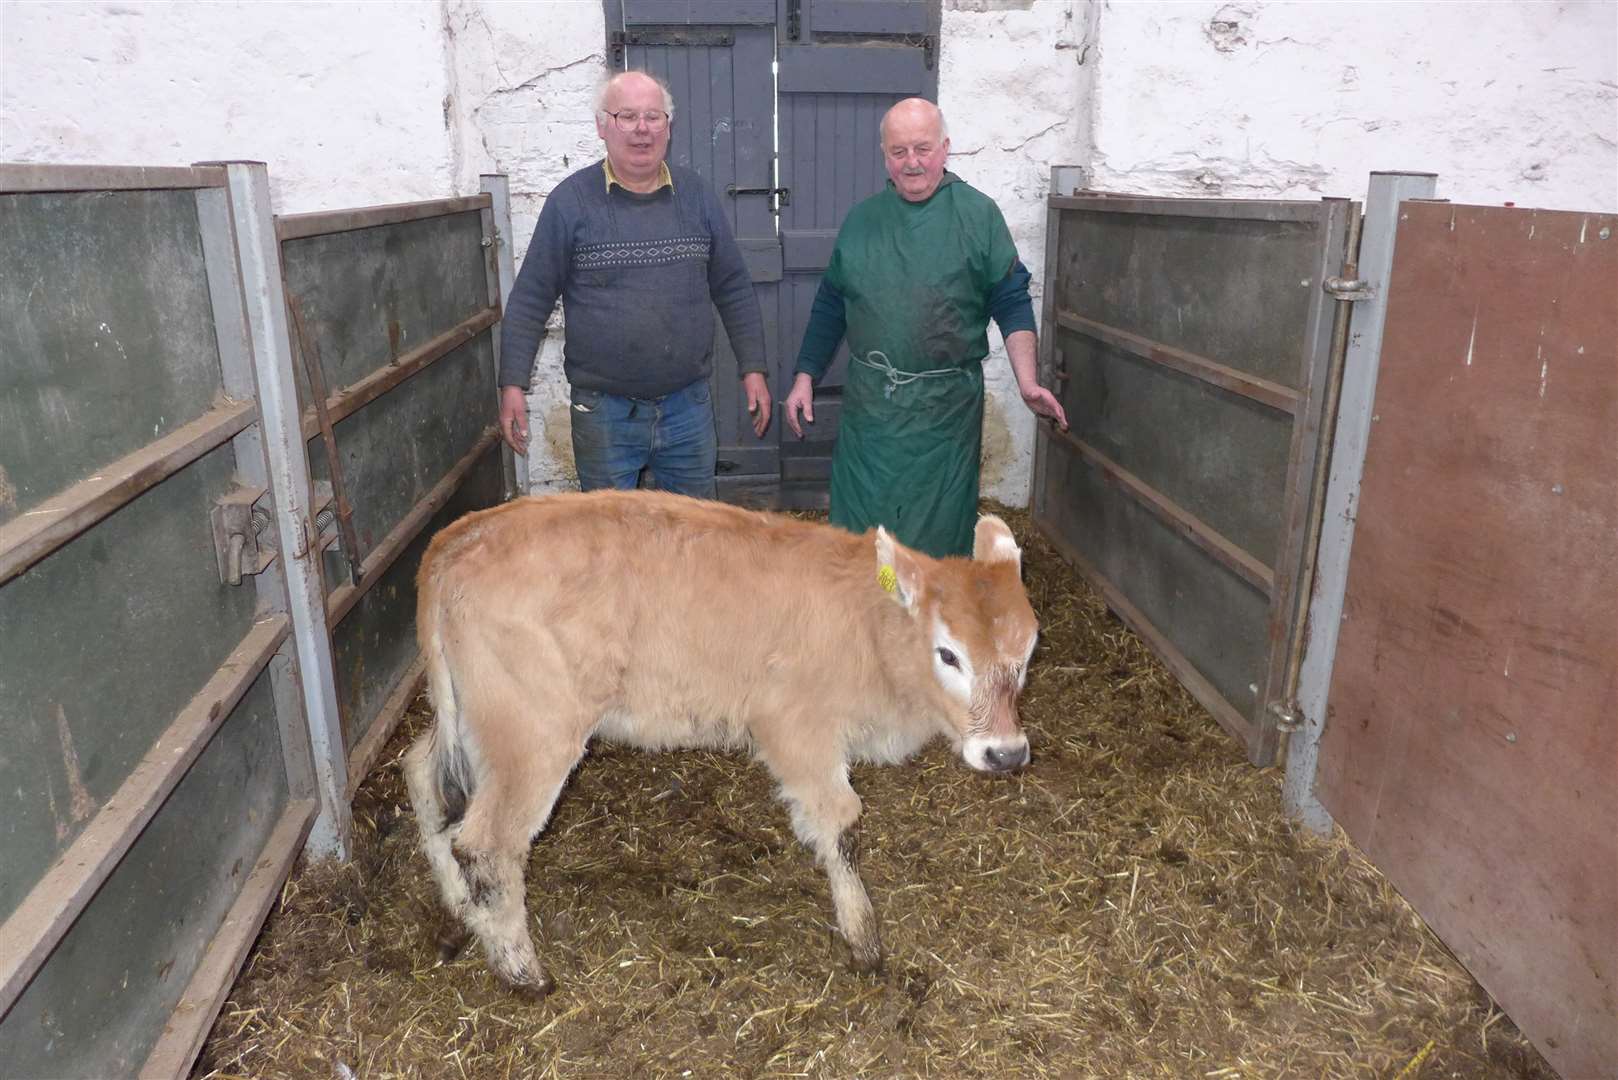 This photo, taken just before the coronavirus social distancing implementation, shows farmer James Anderson (left) and local AI cattle breeding technician Willie Mackay admiring the pedigree Romagnola bull calf, which was born thanks to using a 44-year-old frozen AI straw.